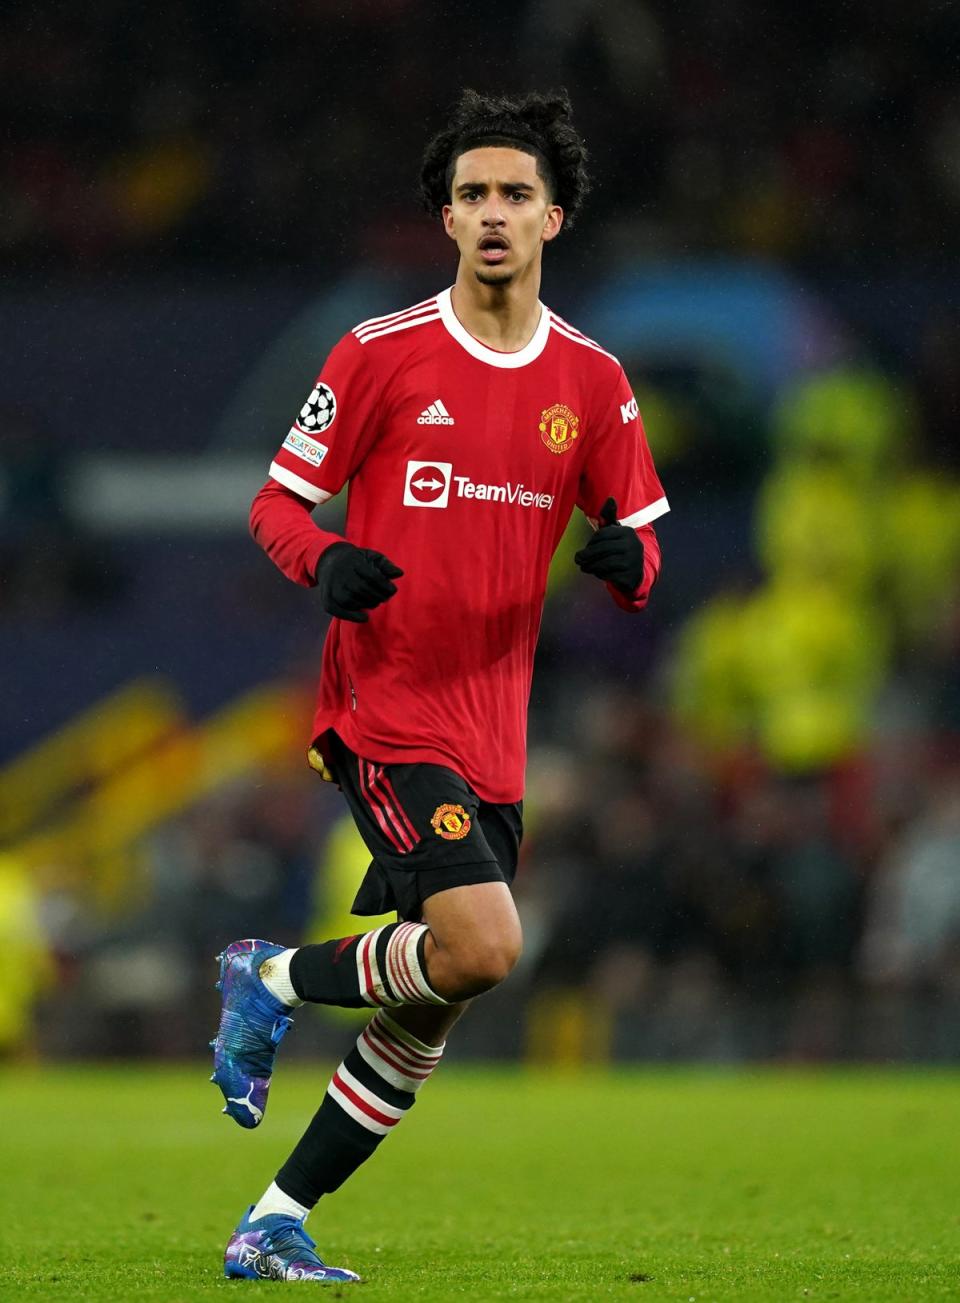 Zidane Iqbal has made one competitive first-team appearance for Manchester United (Martin Rickett/PA) (PA Archive)